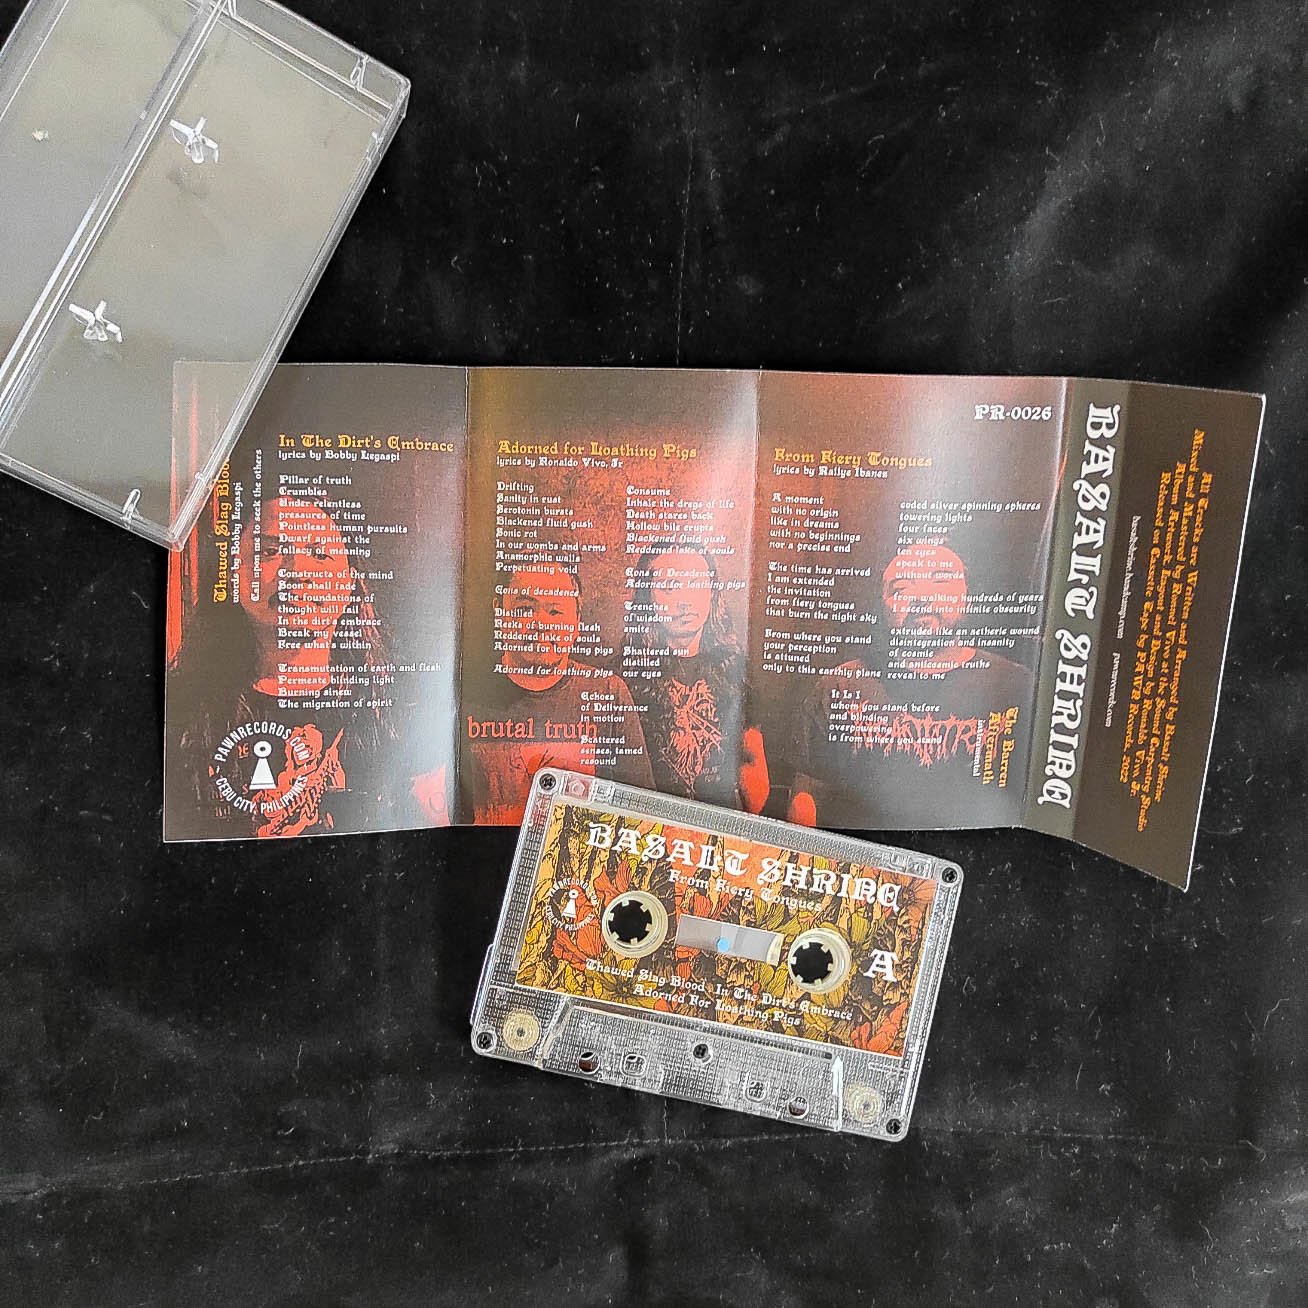 Basalt Shrine - From Fiery Tongues (cassette tape) - PAWN